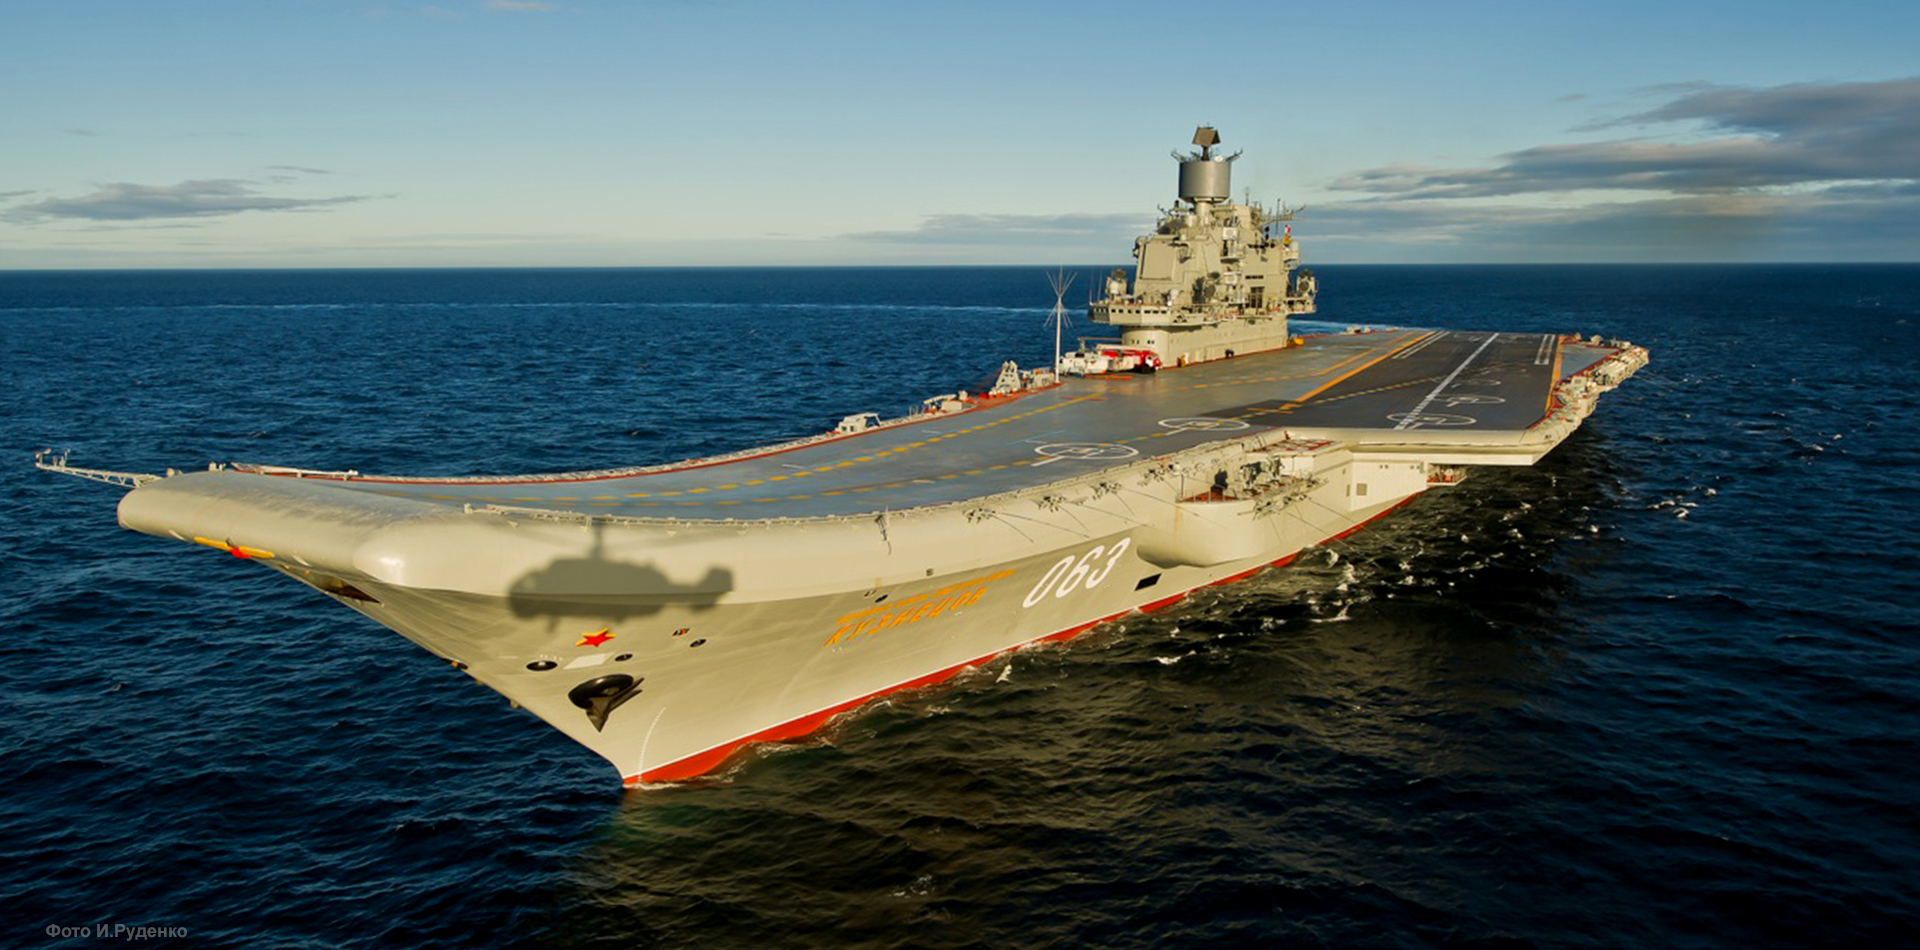 The only Russian aircraft carrier Admiral Kuznetsov caught fire in Murmansk - it has been under repair since 2018